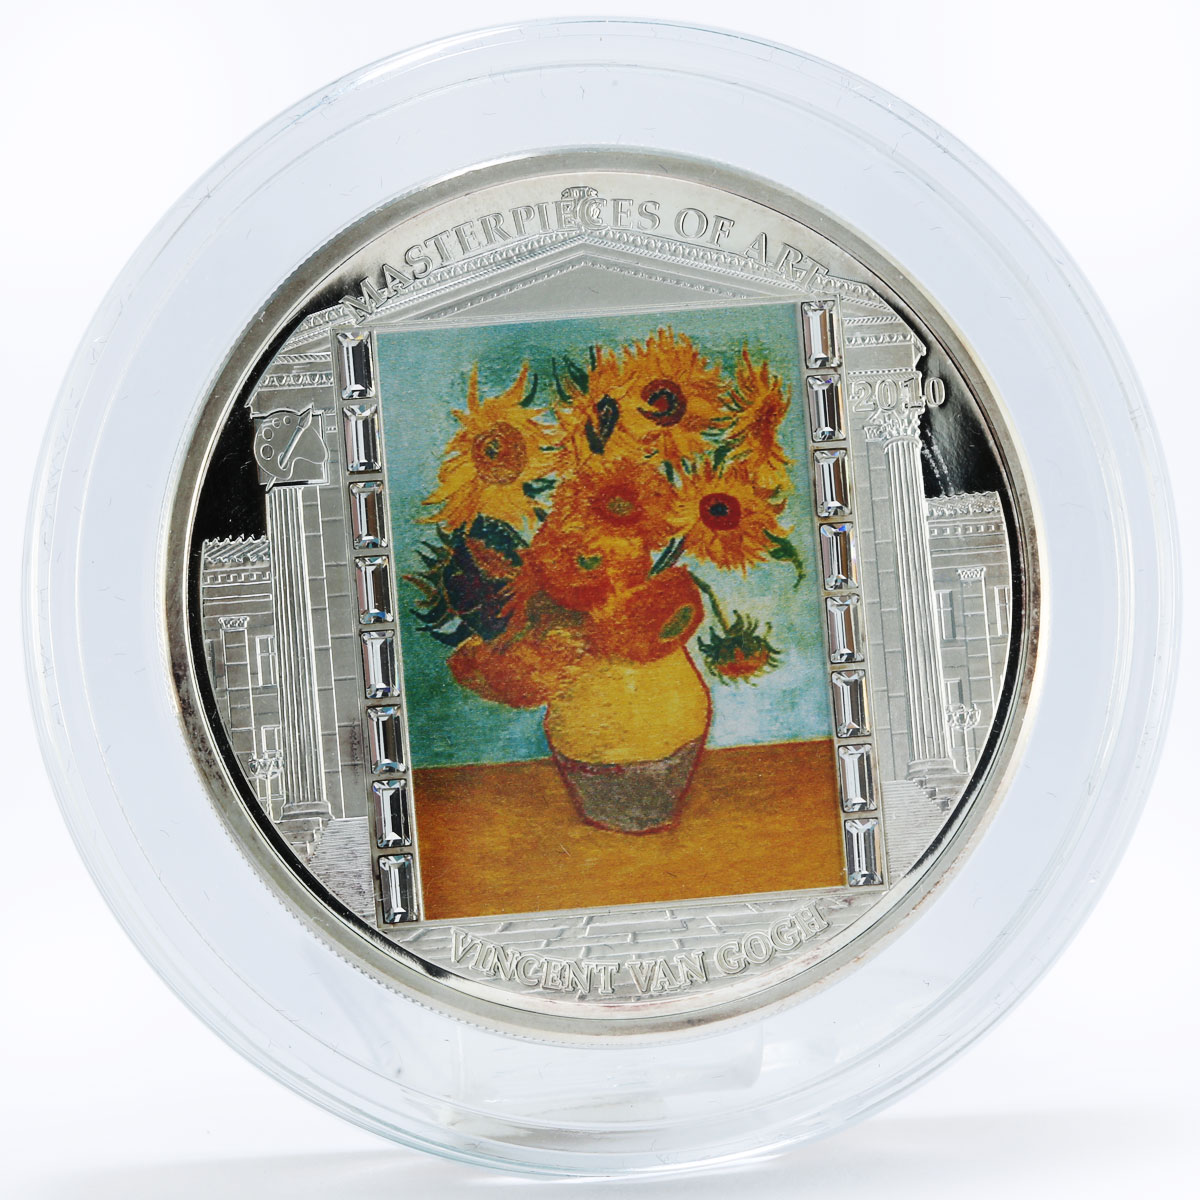 Cook Islands 20 dollars Vincent van Gogh Art Sunflowers colored silver coin 2010